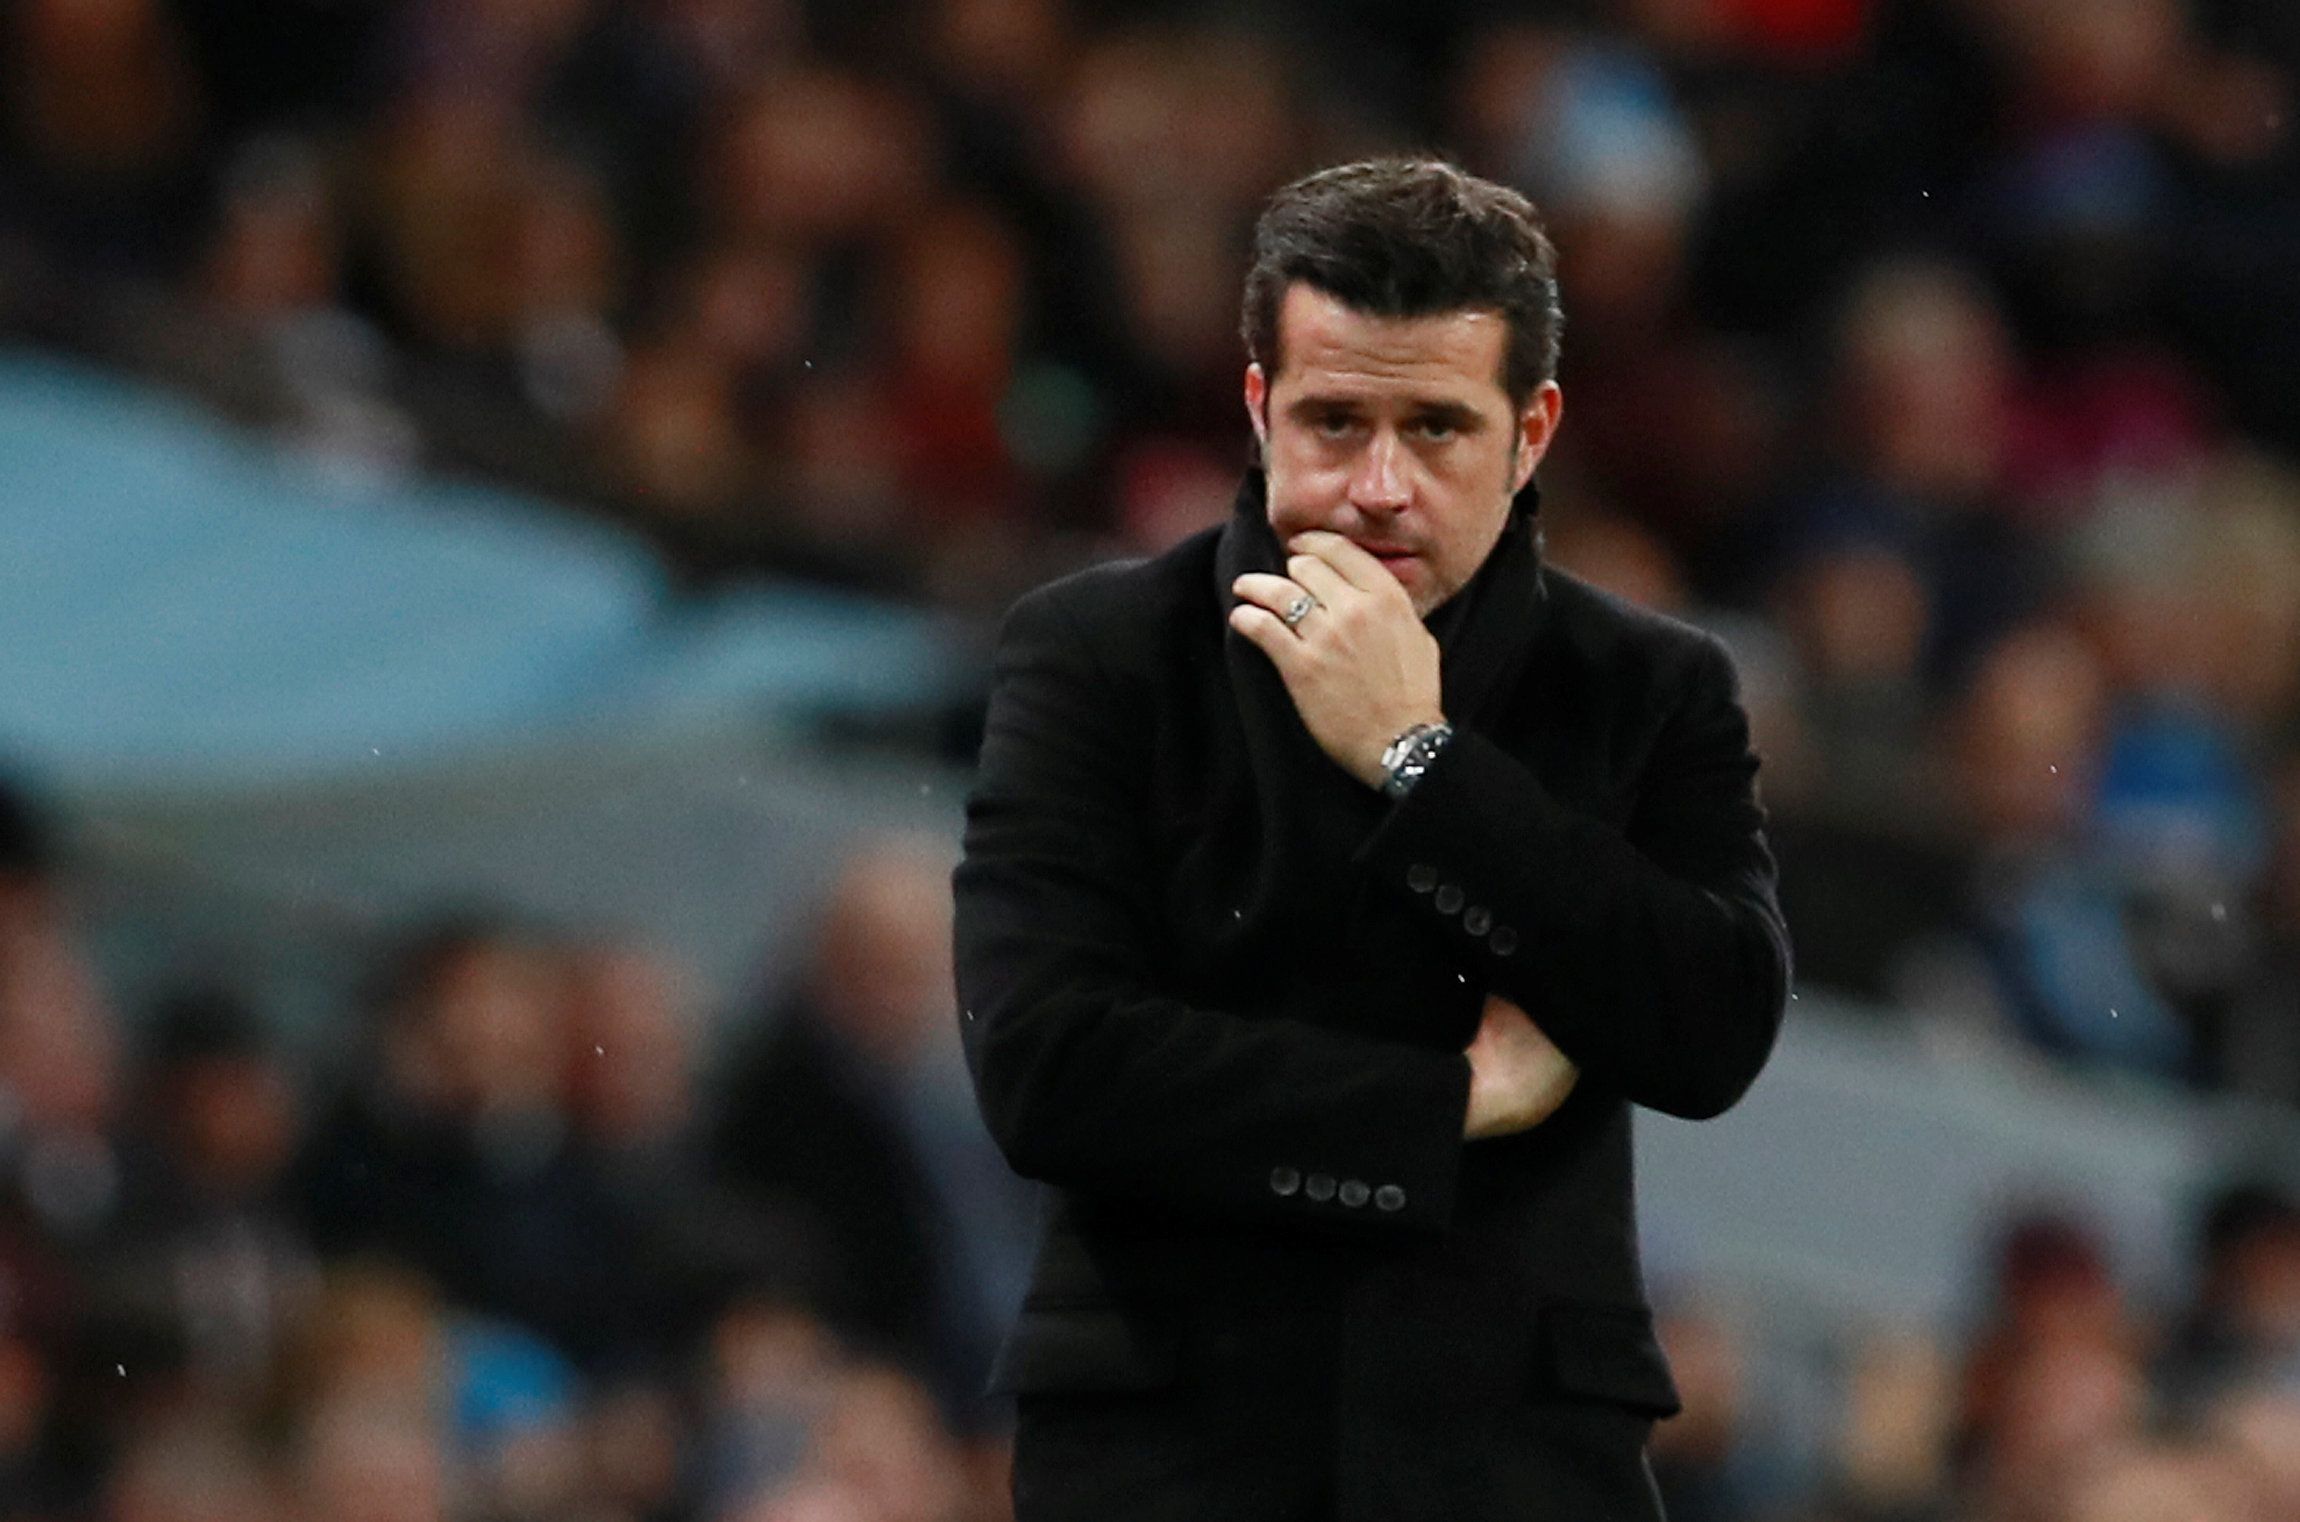 Soccer Football - Premier League - Manchester City vs Watford - Etihad Stadium, Manchester, Britain - January 2, 2018   Watford manager Marco Silva     Action Images via Reuters/Jason Cairnduff    EDITORIAL USE ONLY. No use with unauthorized audio, video, data, fixture lists, club/league logos or 